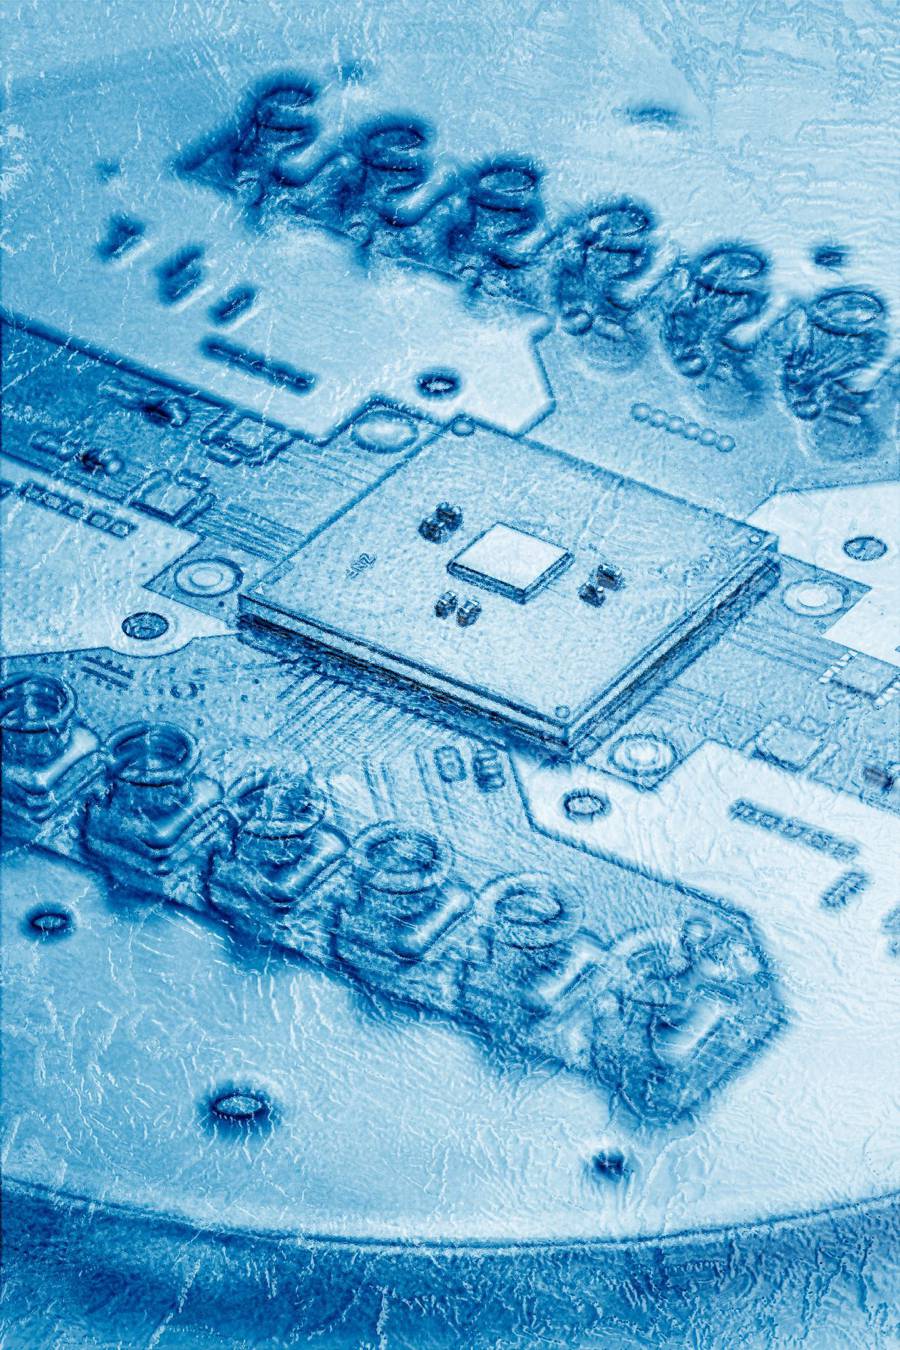 A photo shows an Intel "Horse Ridge" chip mounted on a circuit board. Horse Ridge is a cryogenic control chip for qubits built using Intel’s 22nm FinFET Low Power technology. (Credit: Marieke de Lorijn)